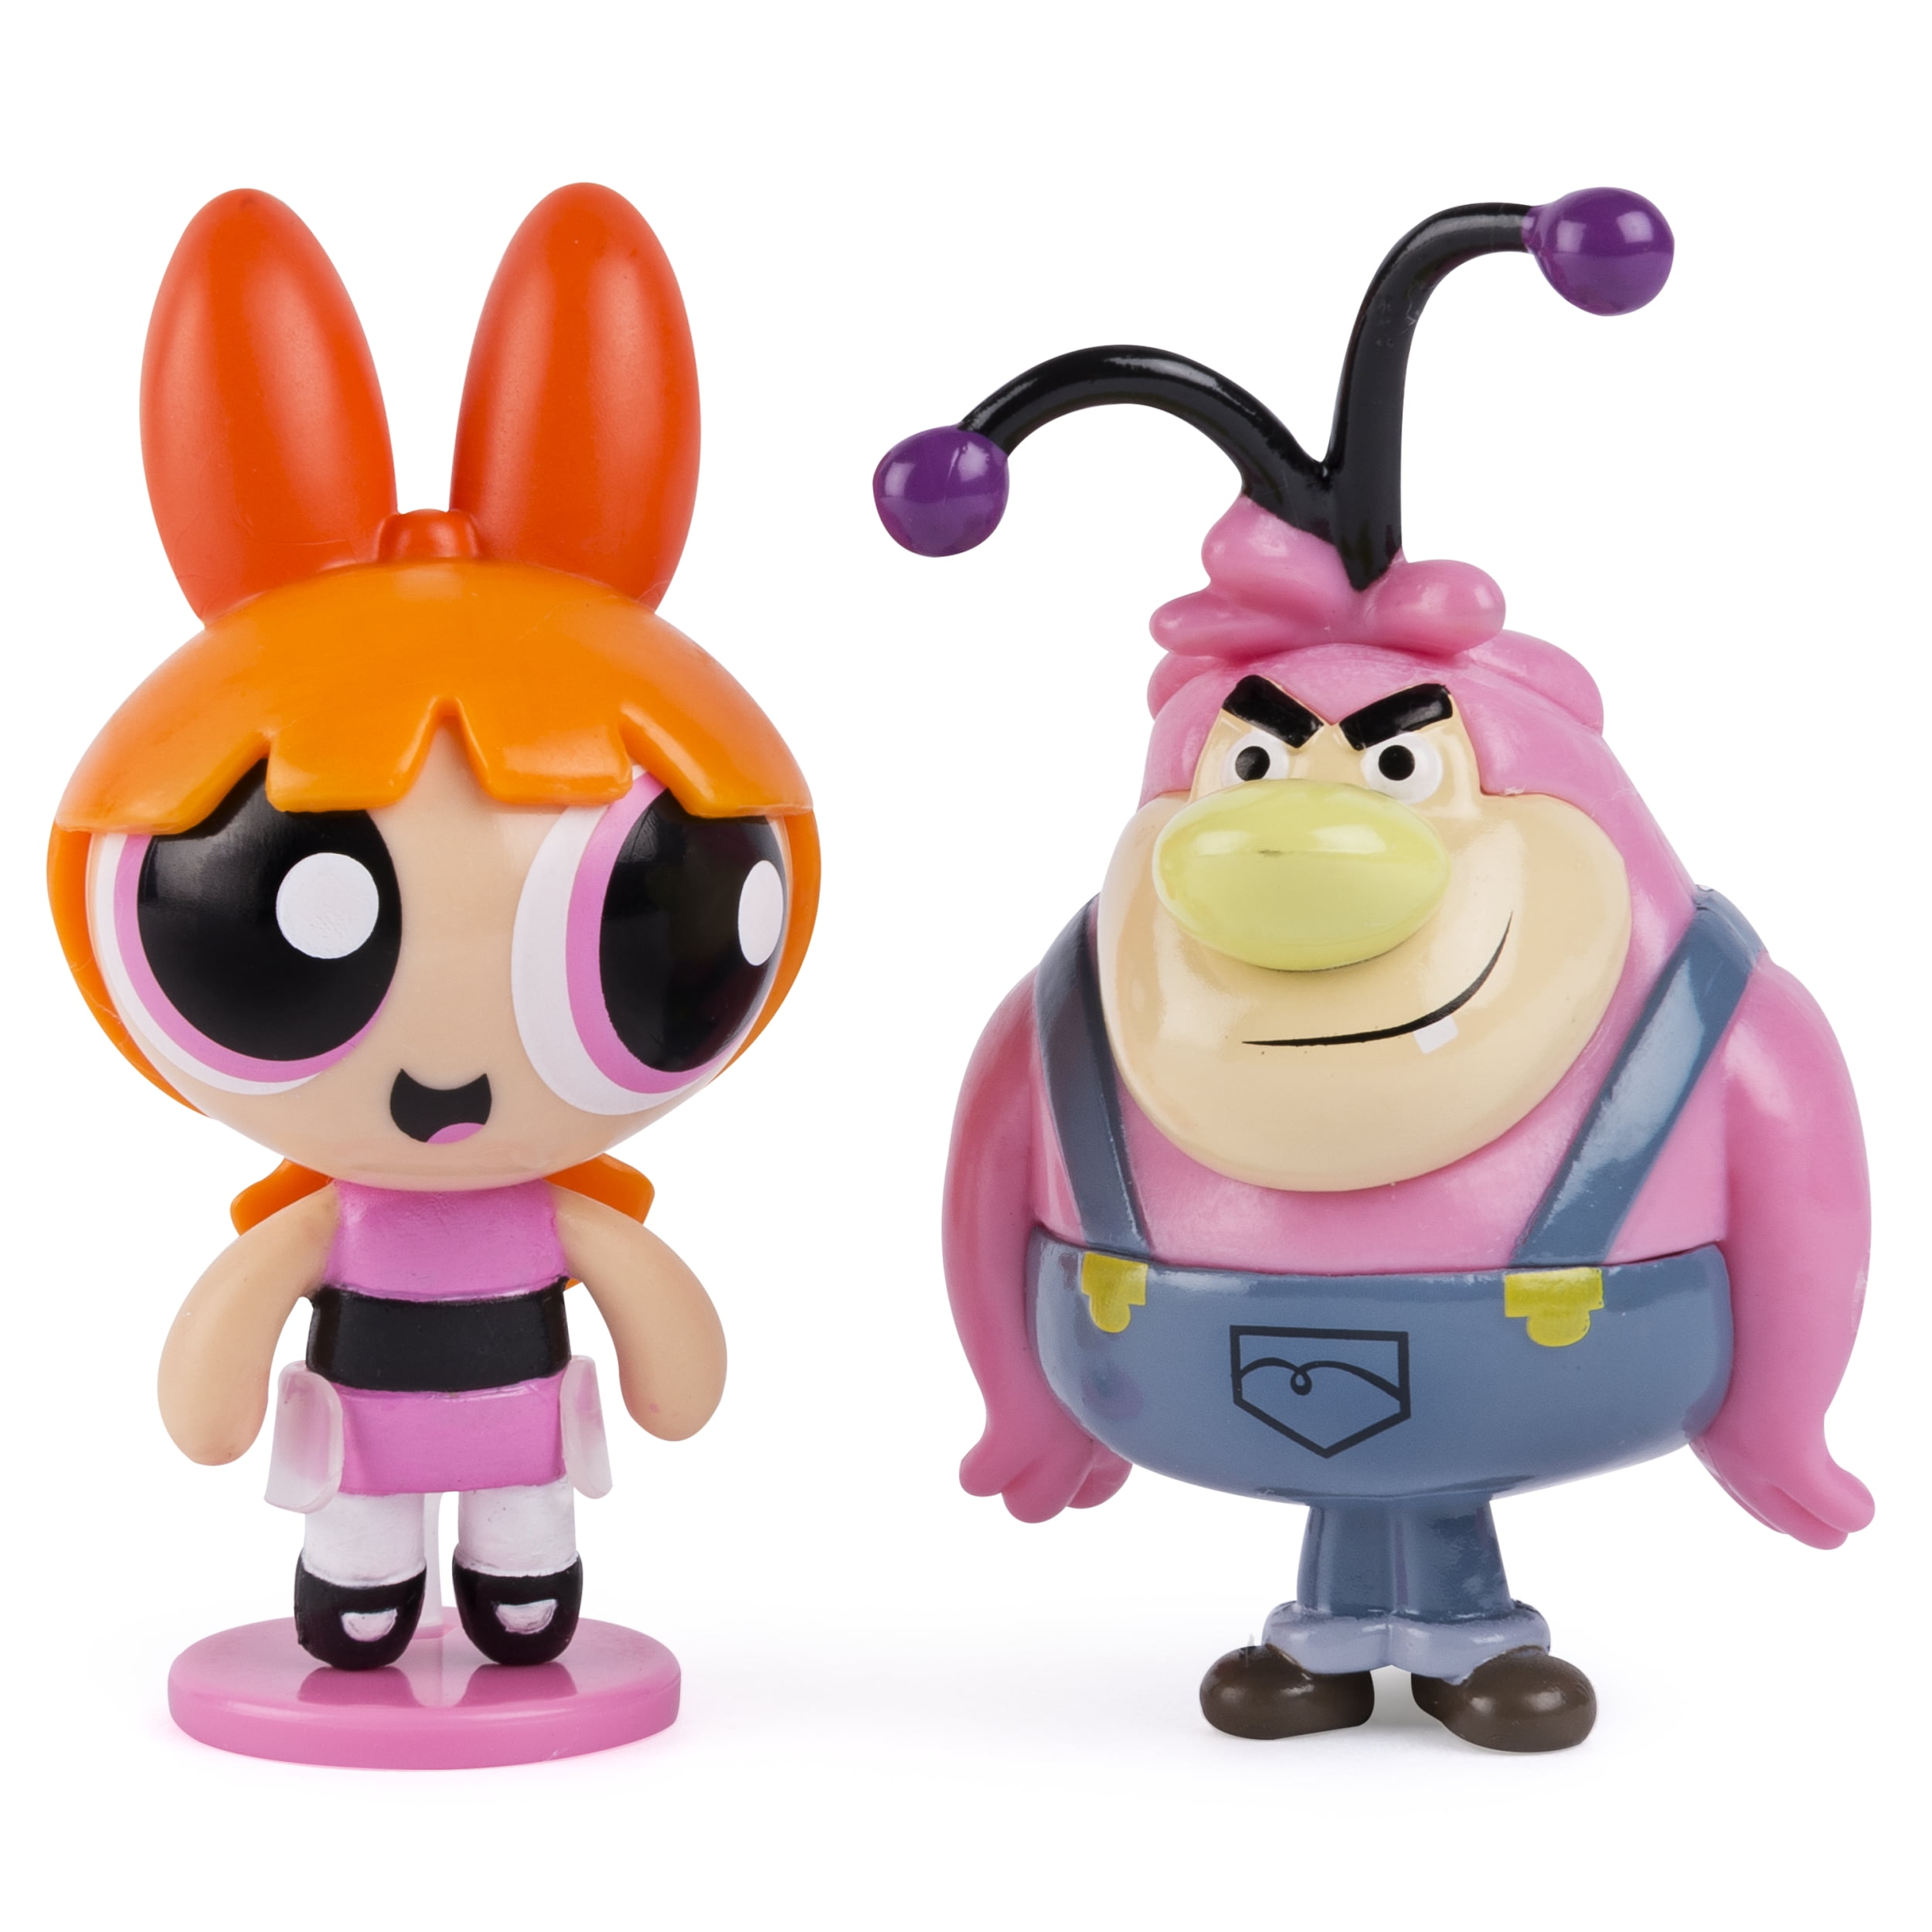 2-Pack 2 inch Action Dolls with Display Stands Blossom & Fuzzy Lumpkins Spin Master 20073409 The Powerpuff Girls